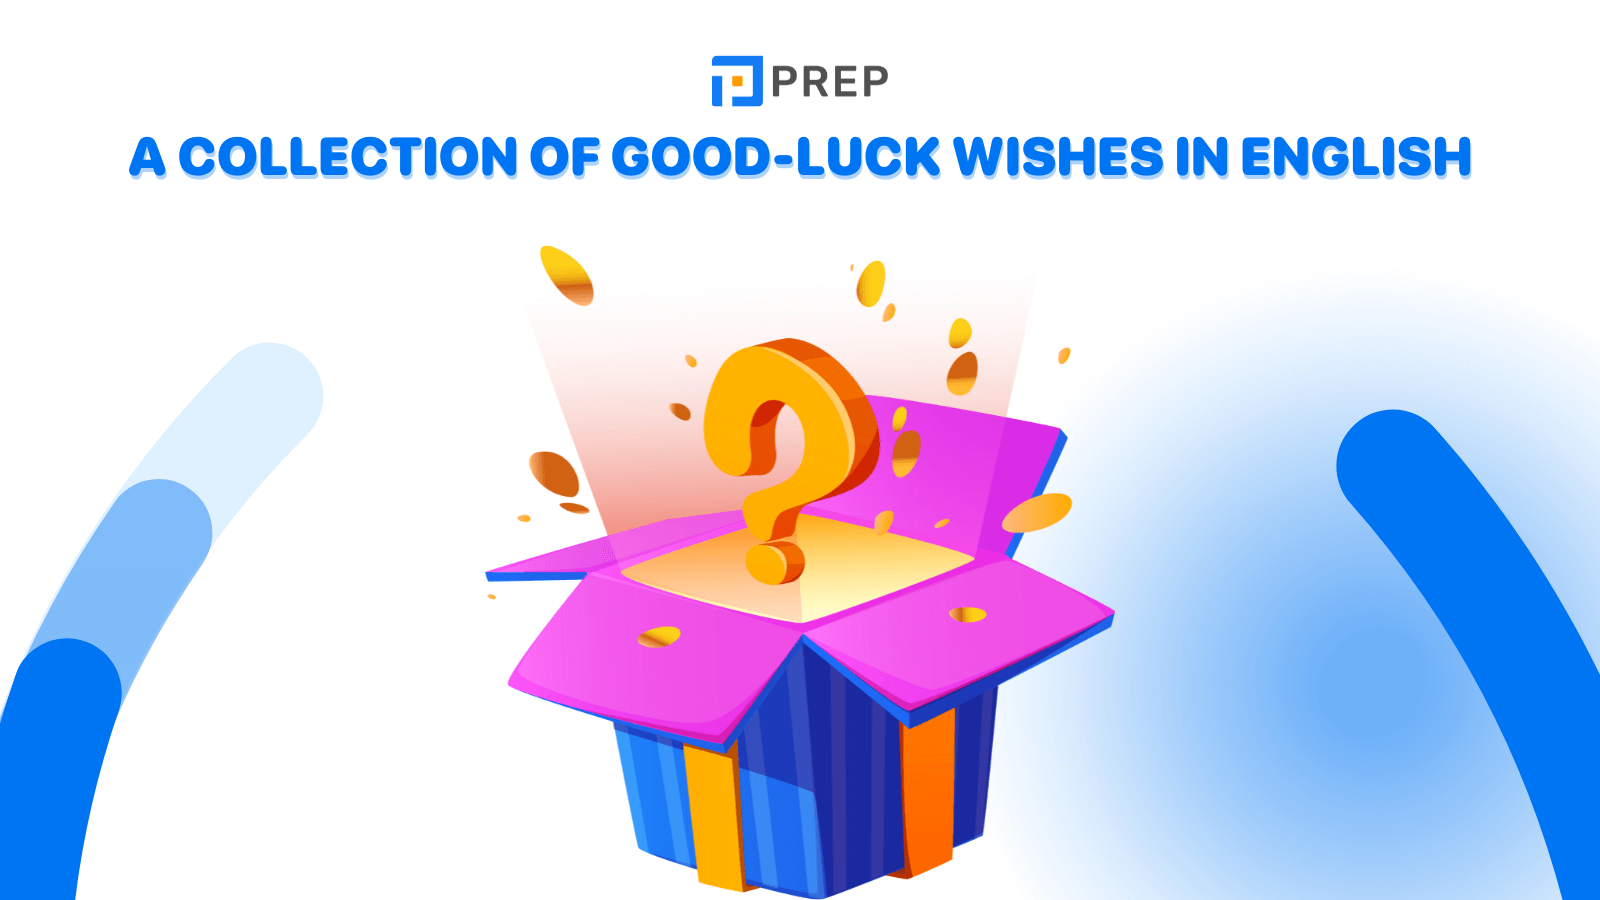 A collection of good-luck wishes in English